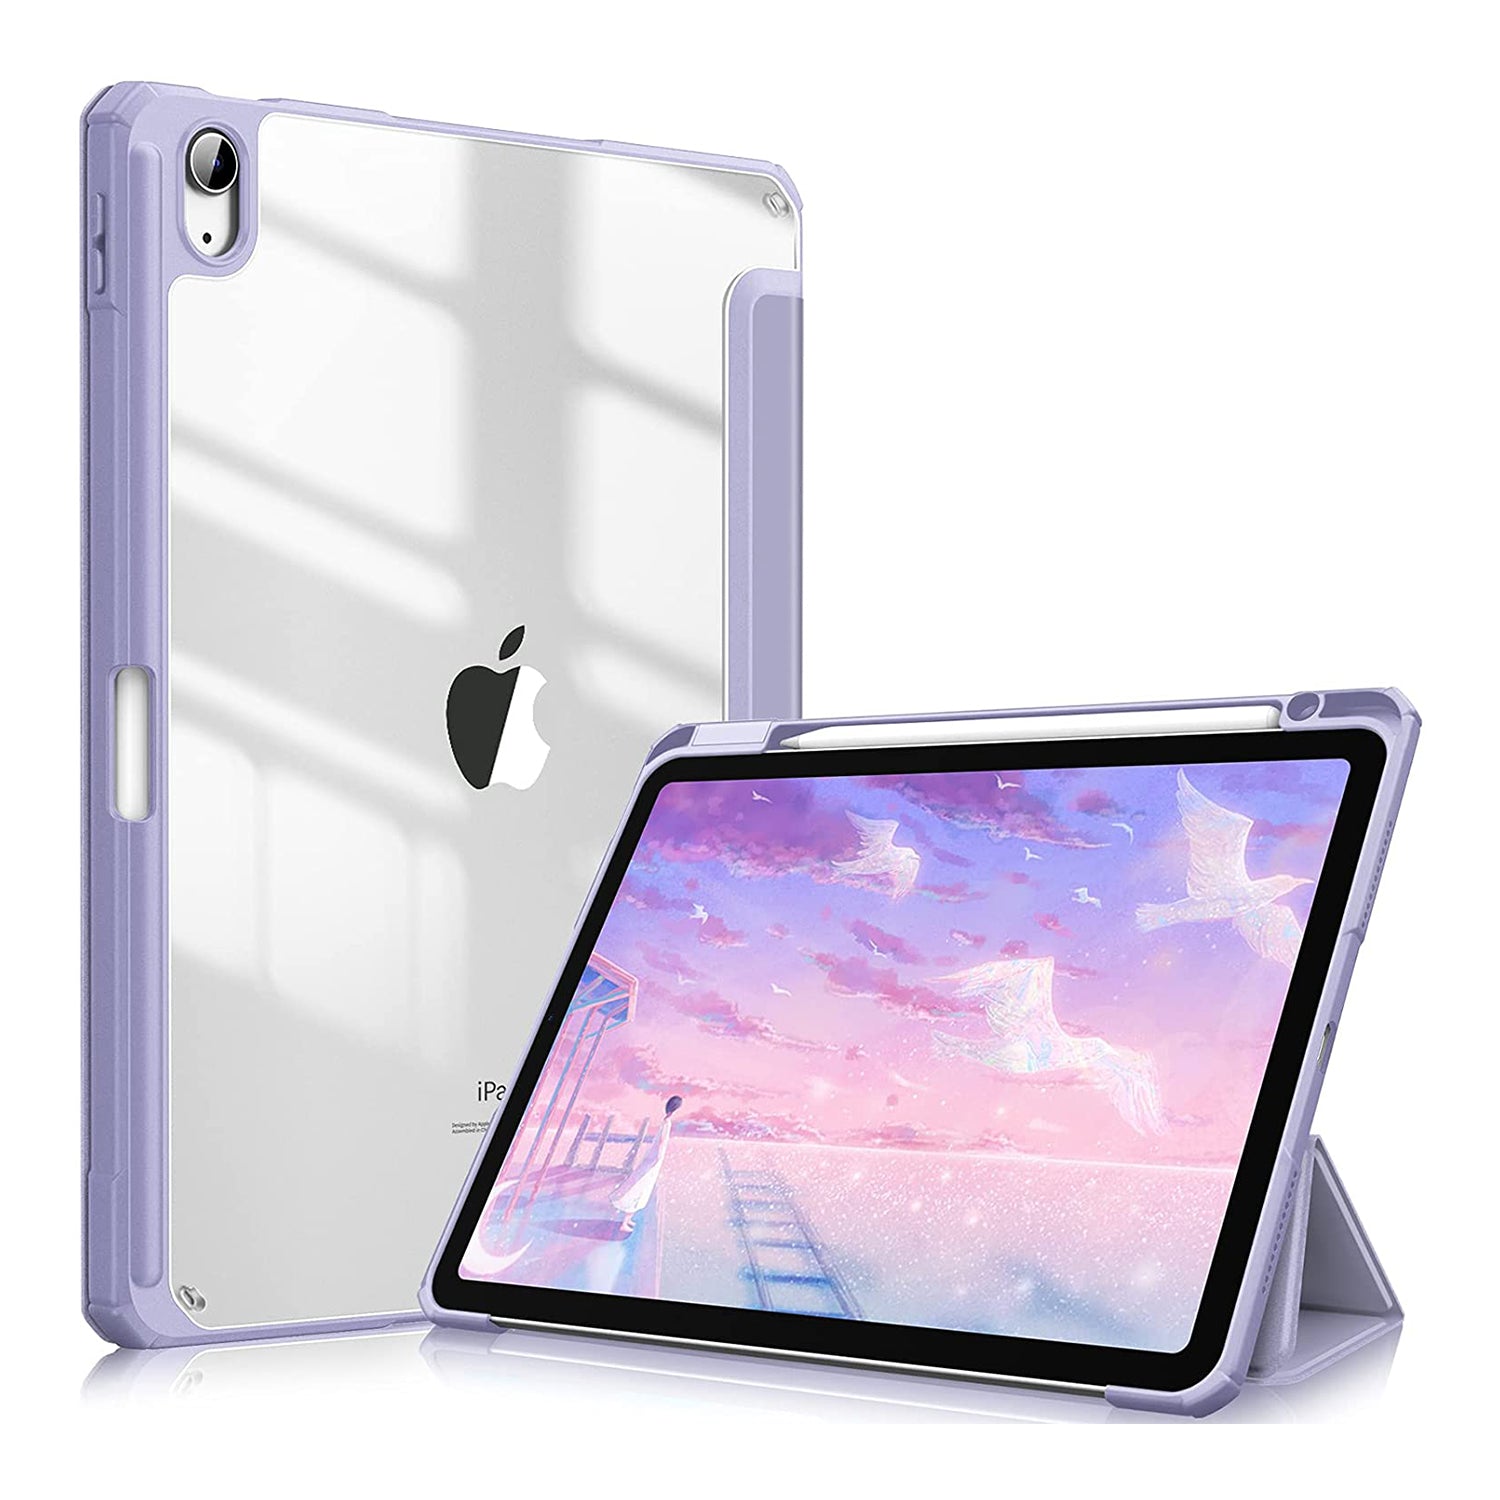 Shockproof Smart Magnetic Case Multi Angle Cover For iPad Air 2 (2014) 9.7  Inch